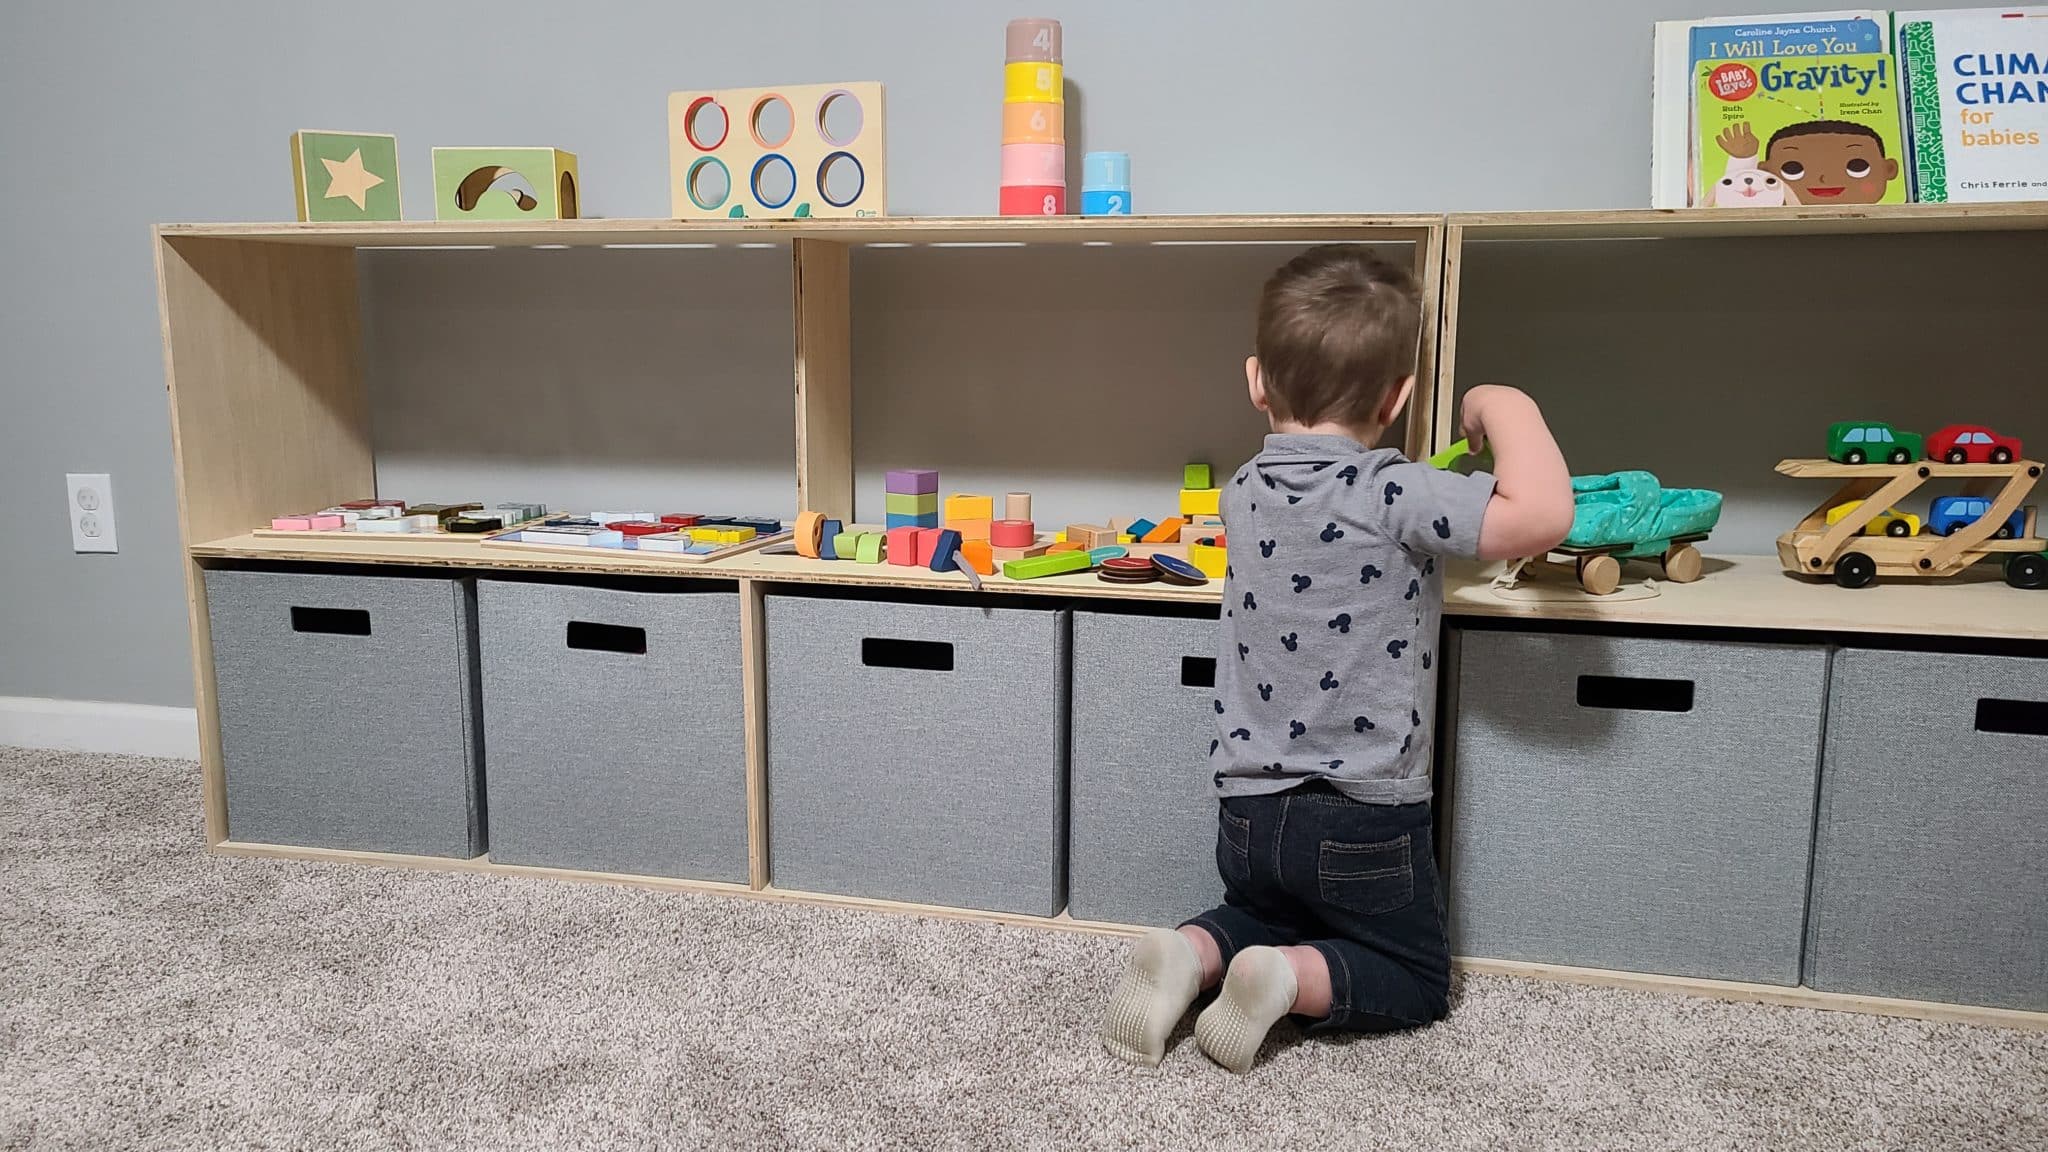 DIY Playroom Storage Shelves - efficient use of plywood to DIY sustainably